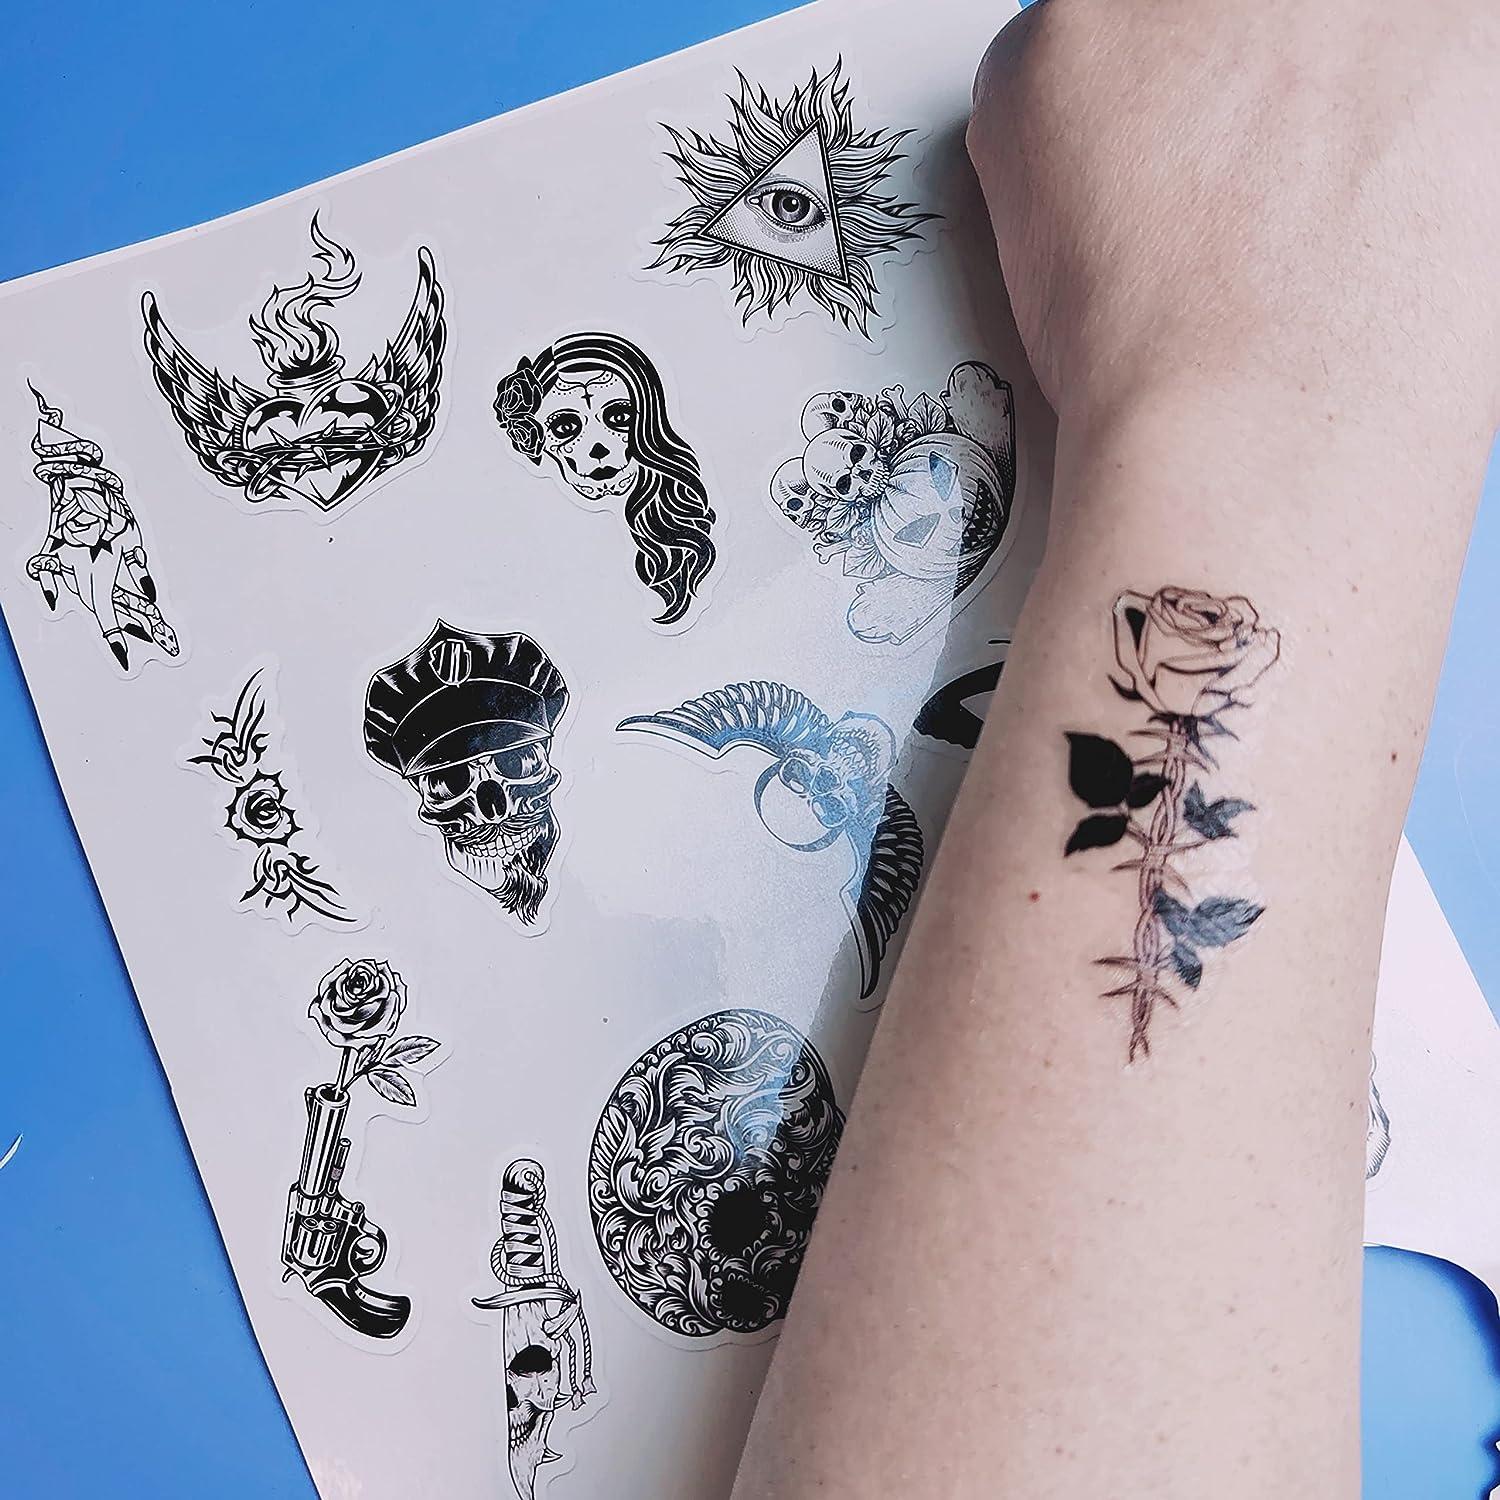 Printable Temporary Tattoo Paper 5 Sheets 8.5x11 inch Transfer Tattoo Decal  Paper for Inkjet & Laser Printer DIY Your Image Transfer Sheet for Skin